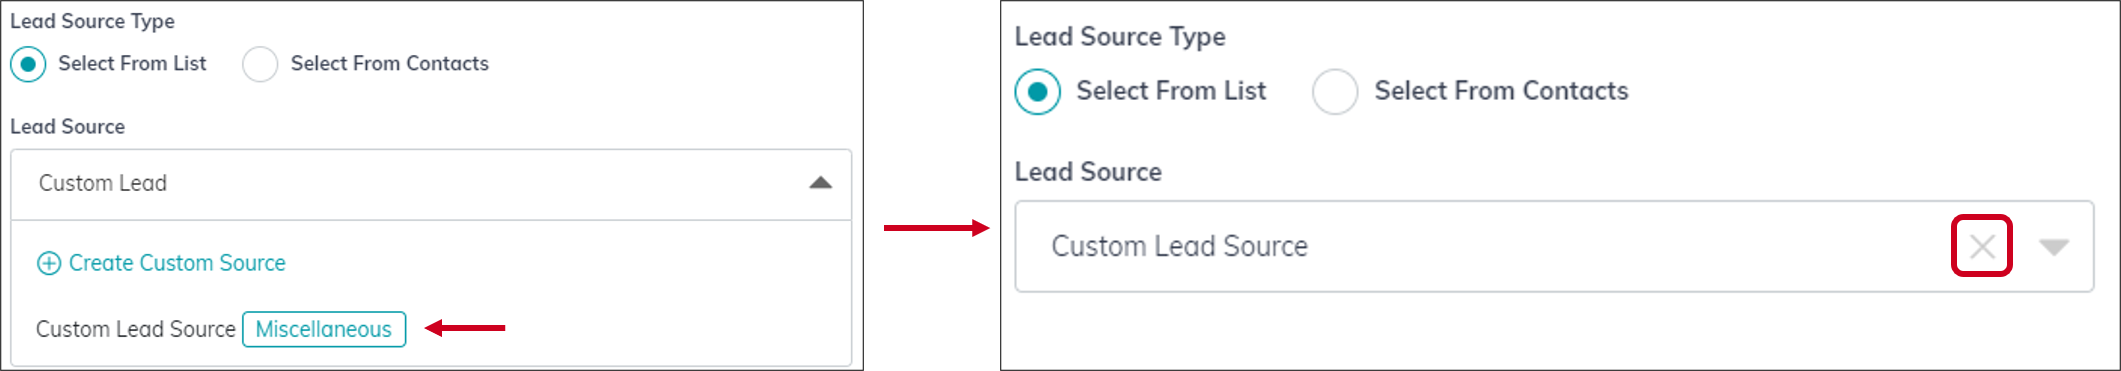 contacts_lead_source_select_lead_source.png